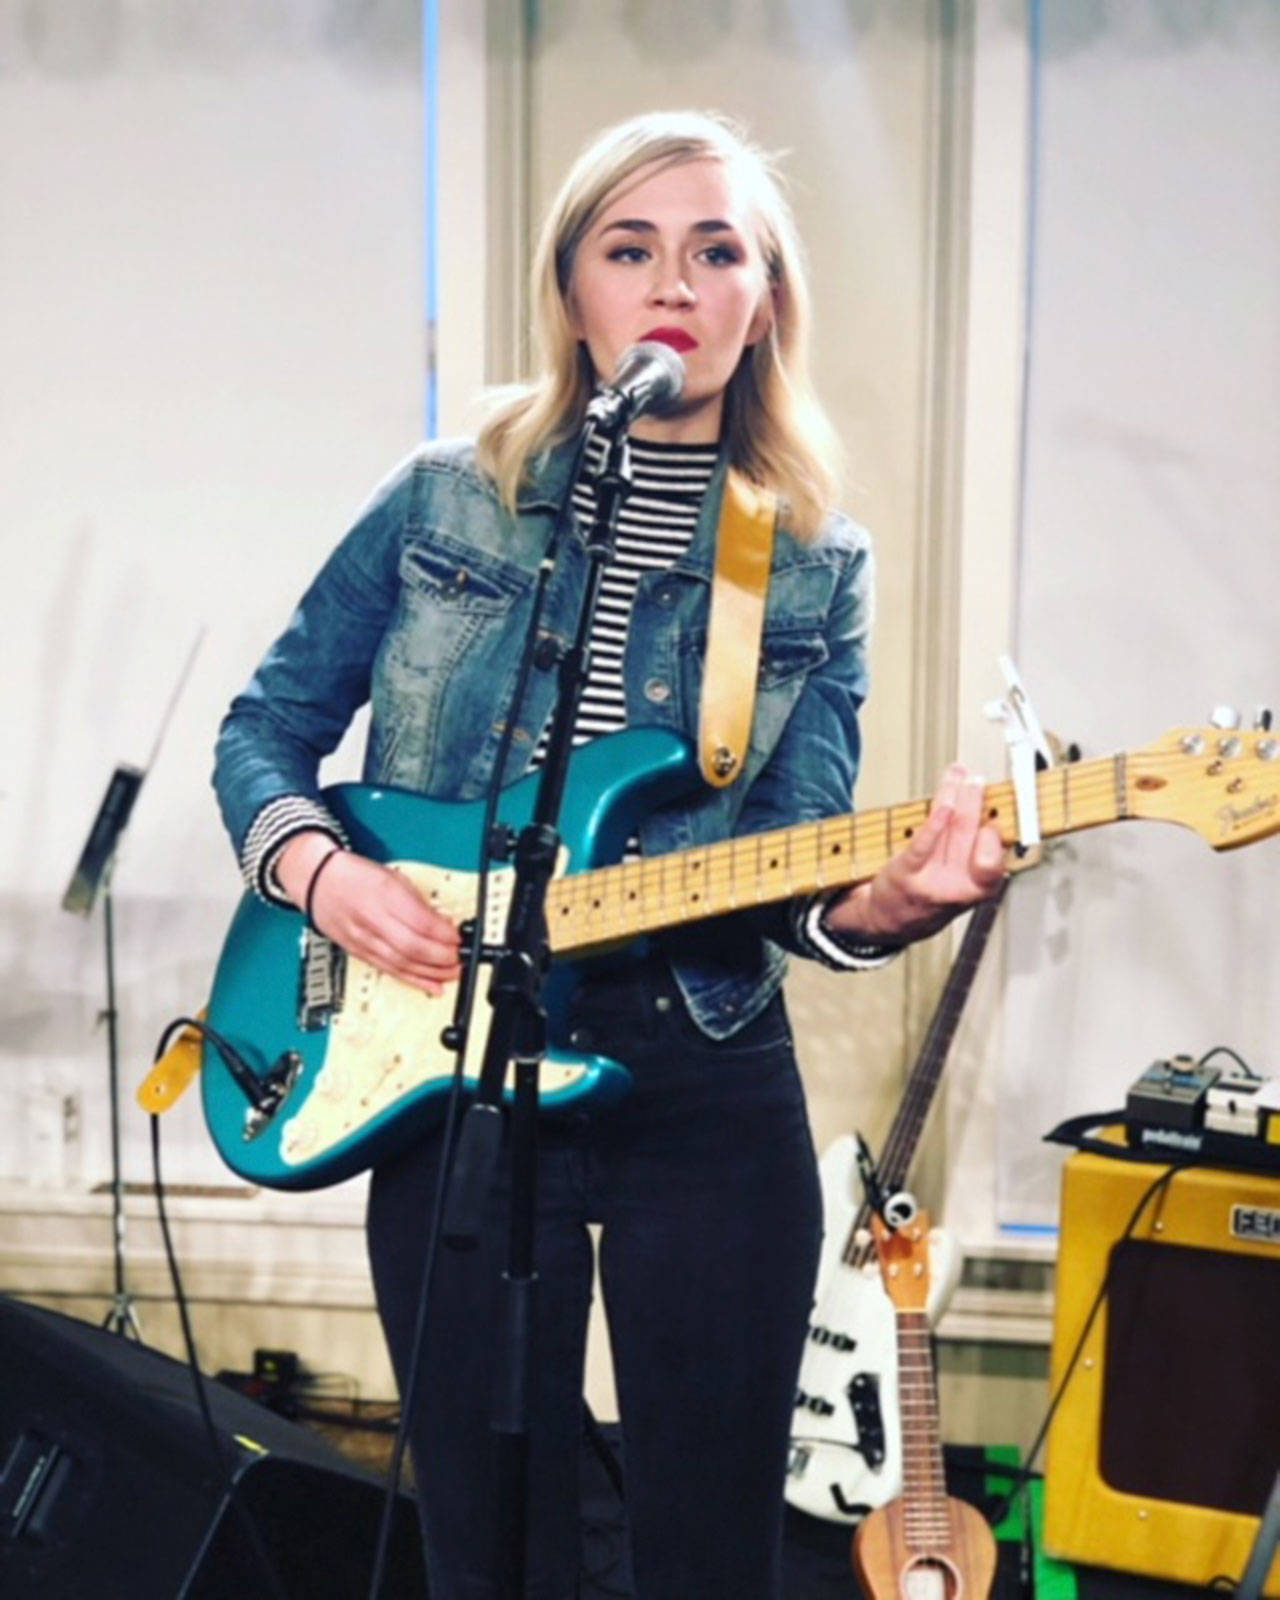 Photo courtesy of the Treehouse Café | Singer/songwriter Olivia Millerschin will perform at the Treehouse Café in Lynwood at 7 p.m. Sunday, April 28.